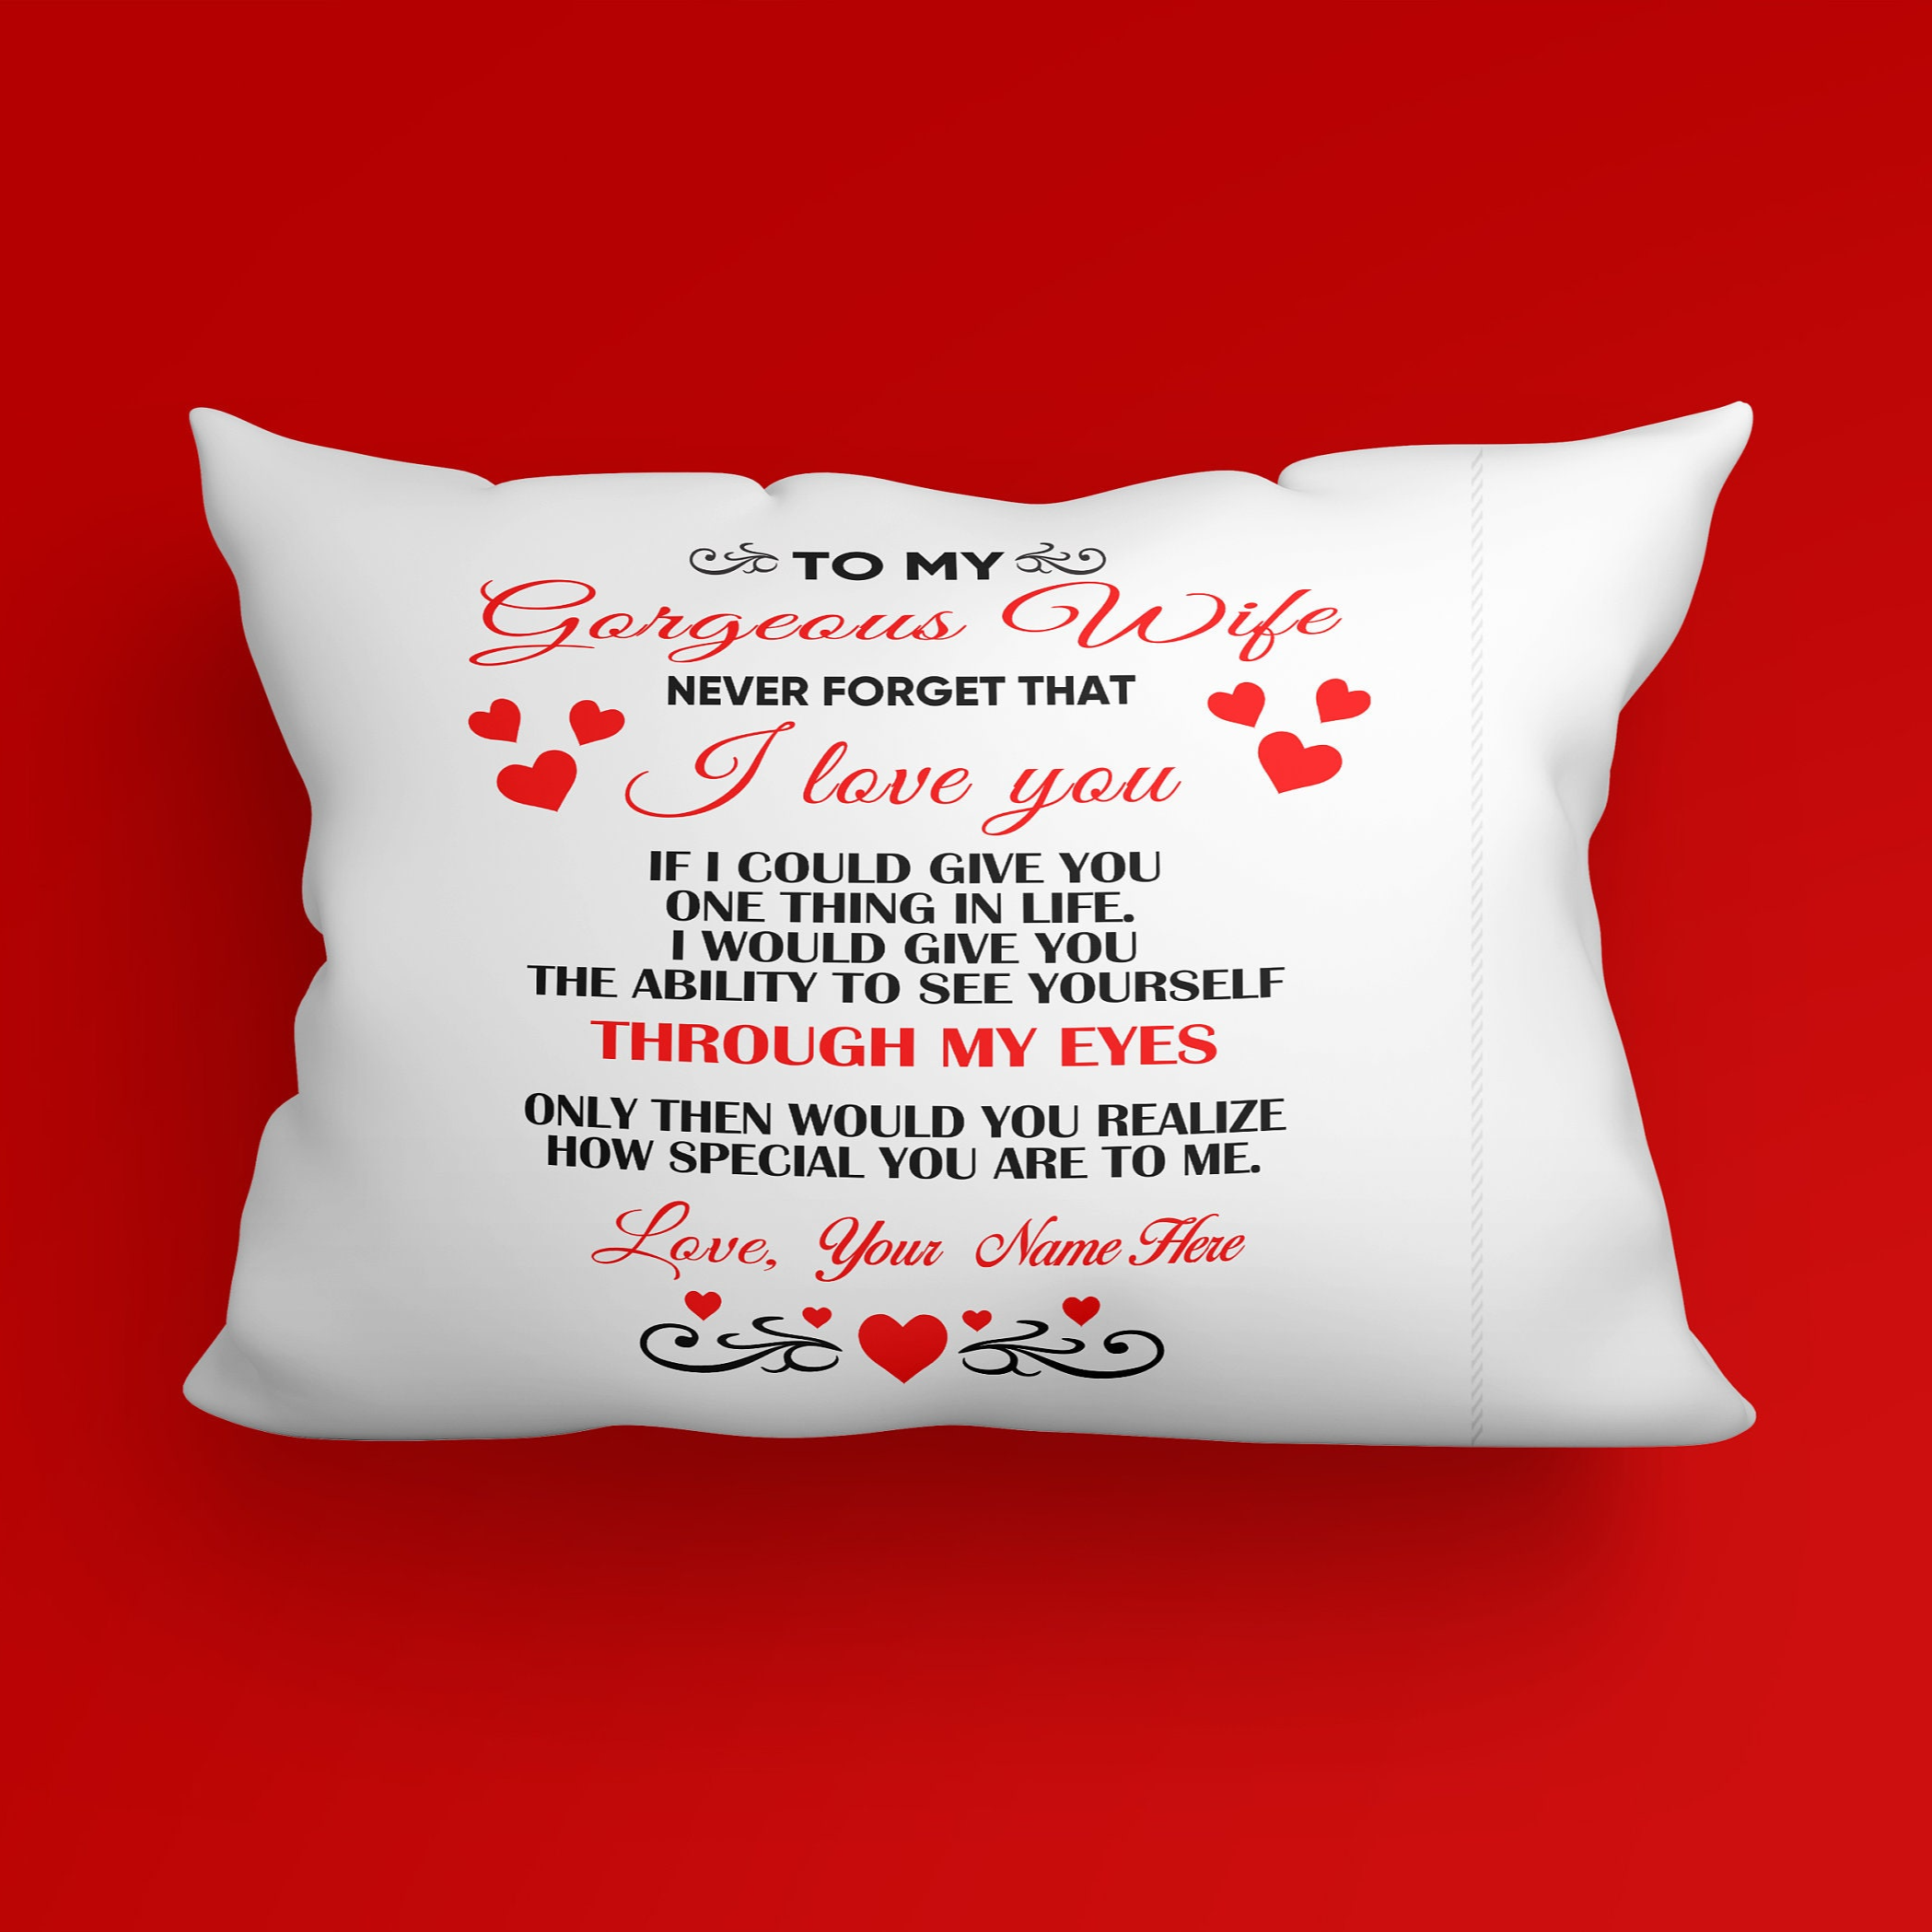 To My Gorgeous Wife - Never Forget - Personalized Pillowcase